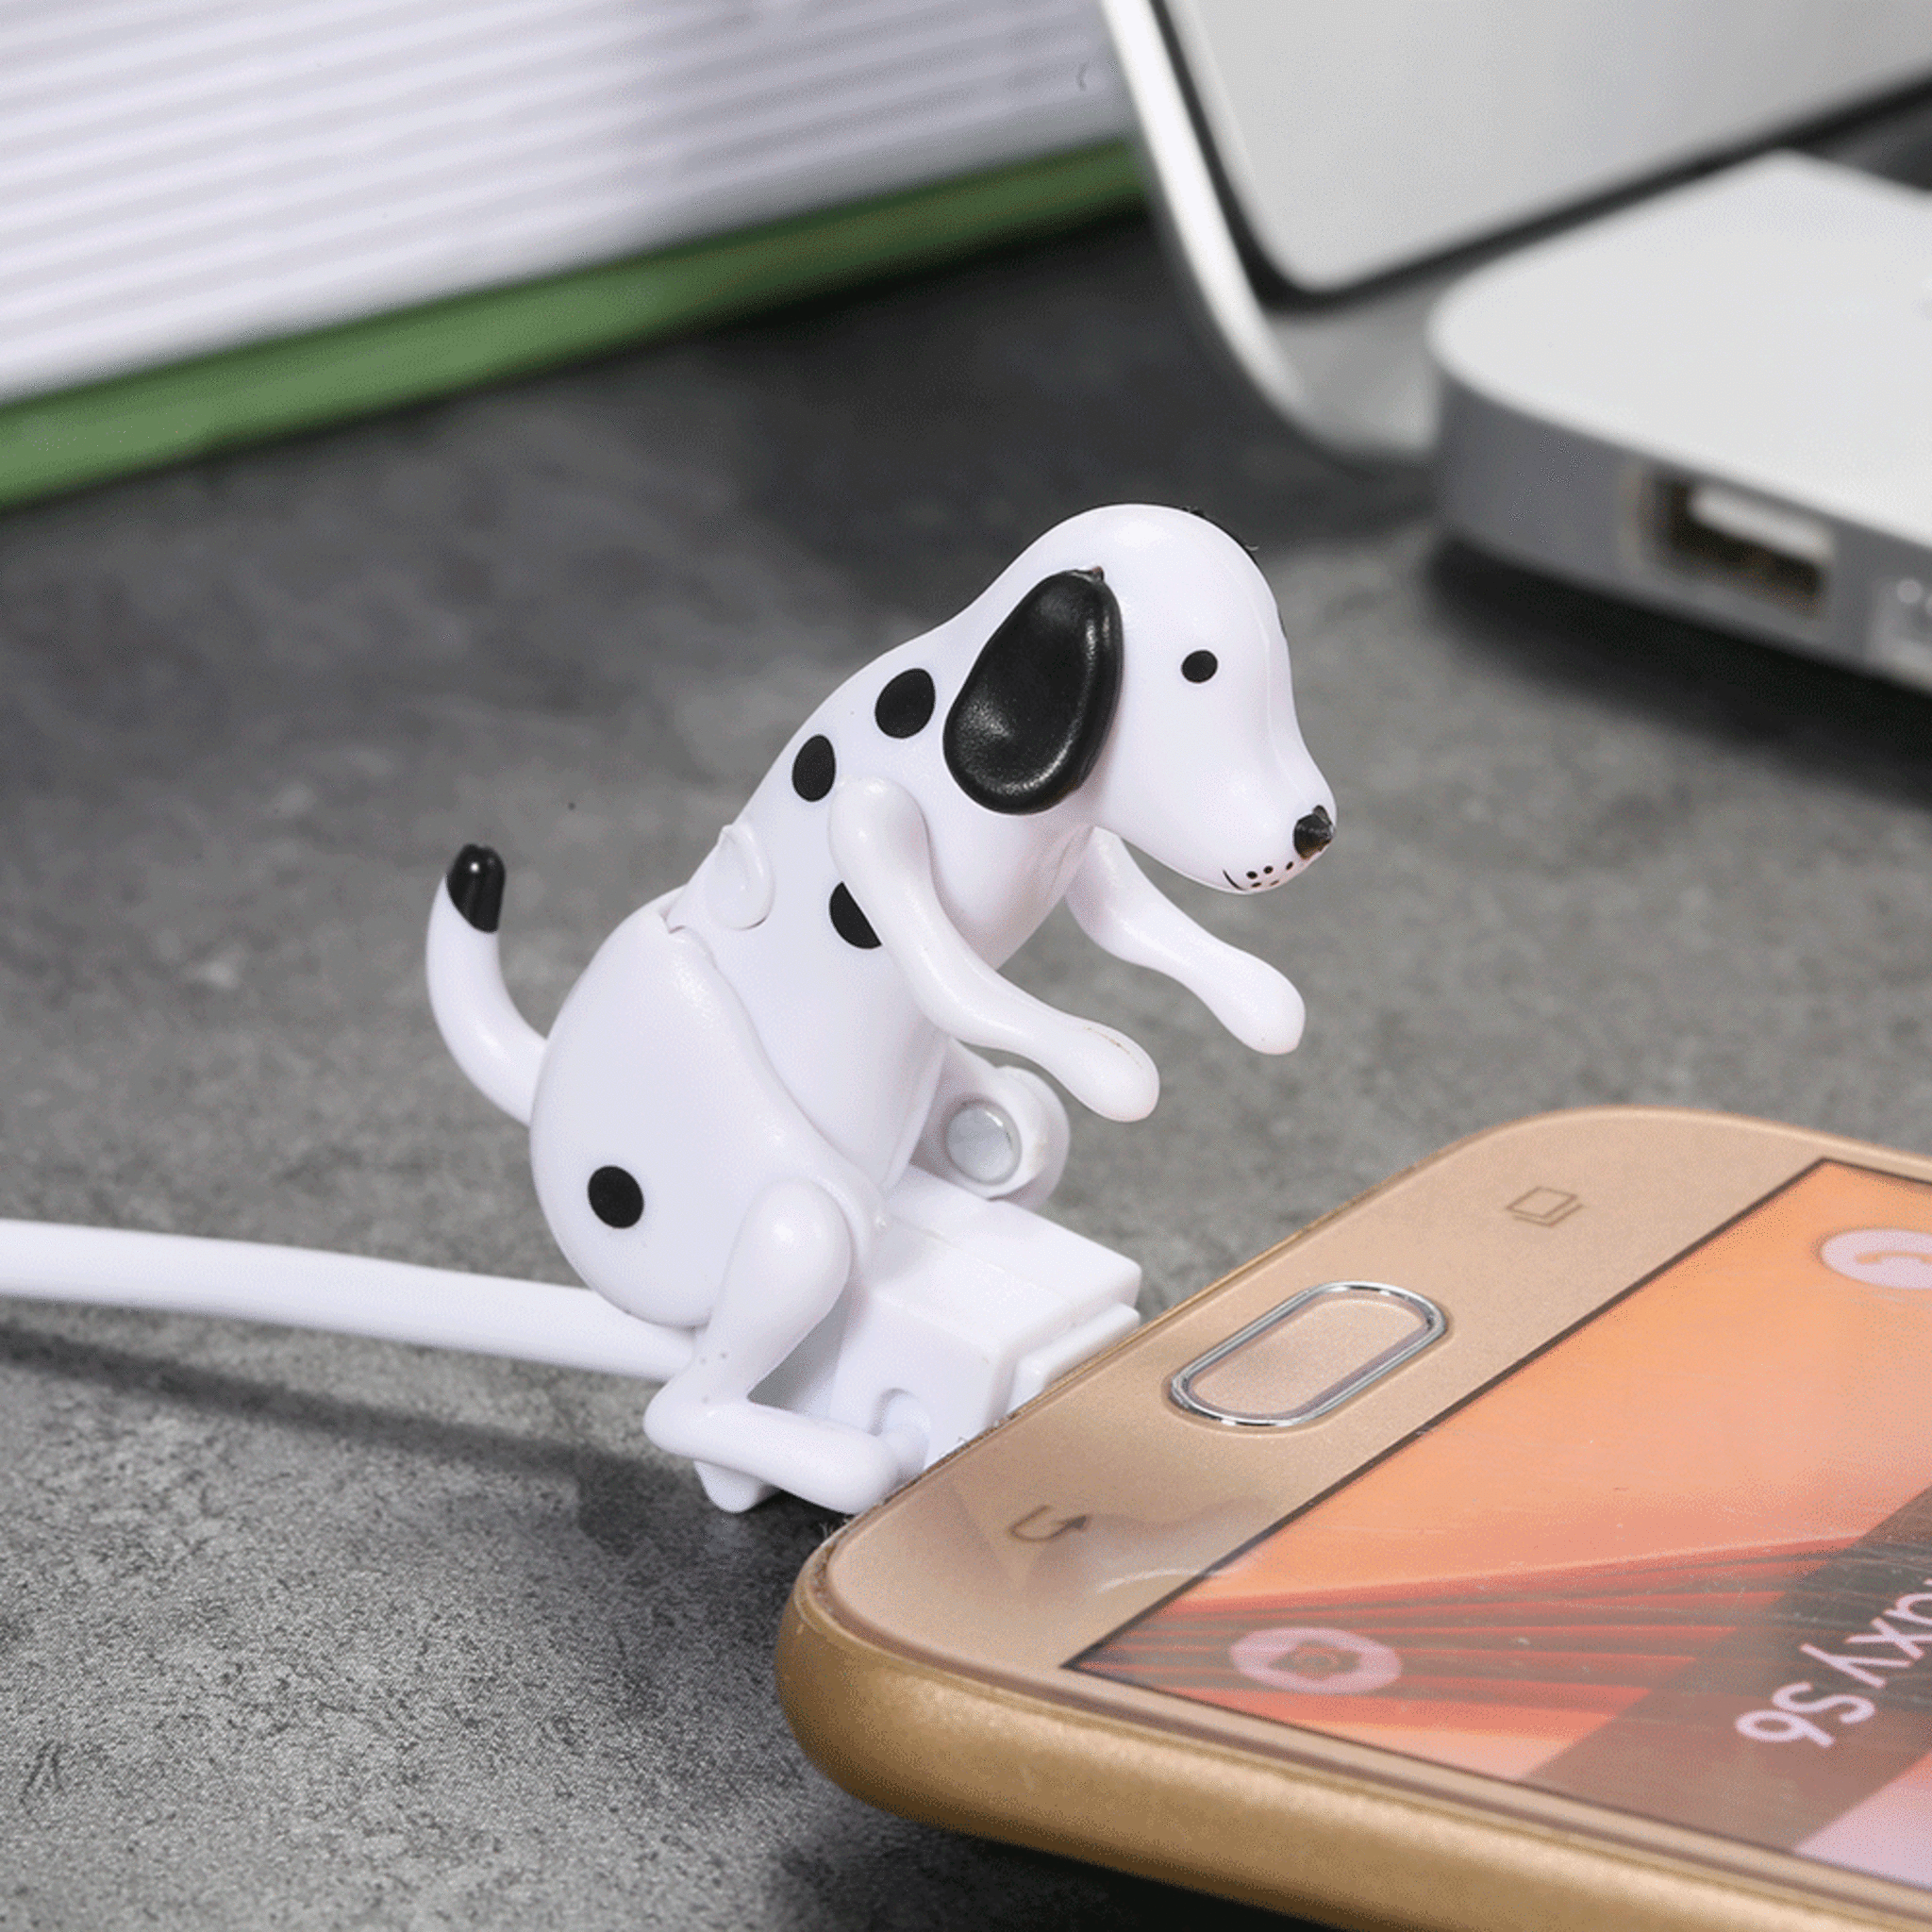 Portable Funny Cute Pet USB Cable Mini Humping Spot Dog Toy Gadget Charger Christmas for iPhone Lightning Dock